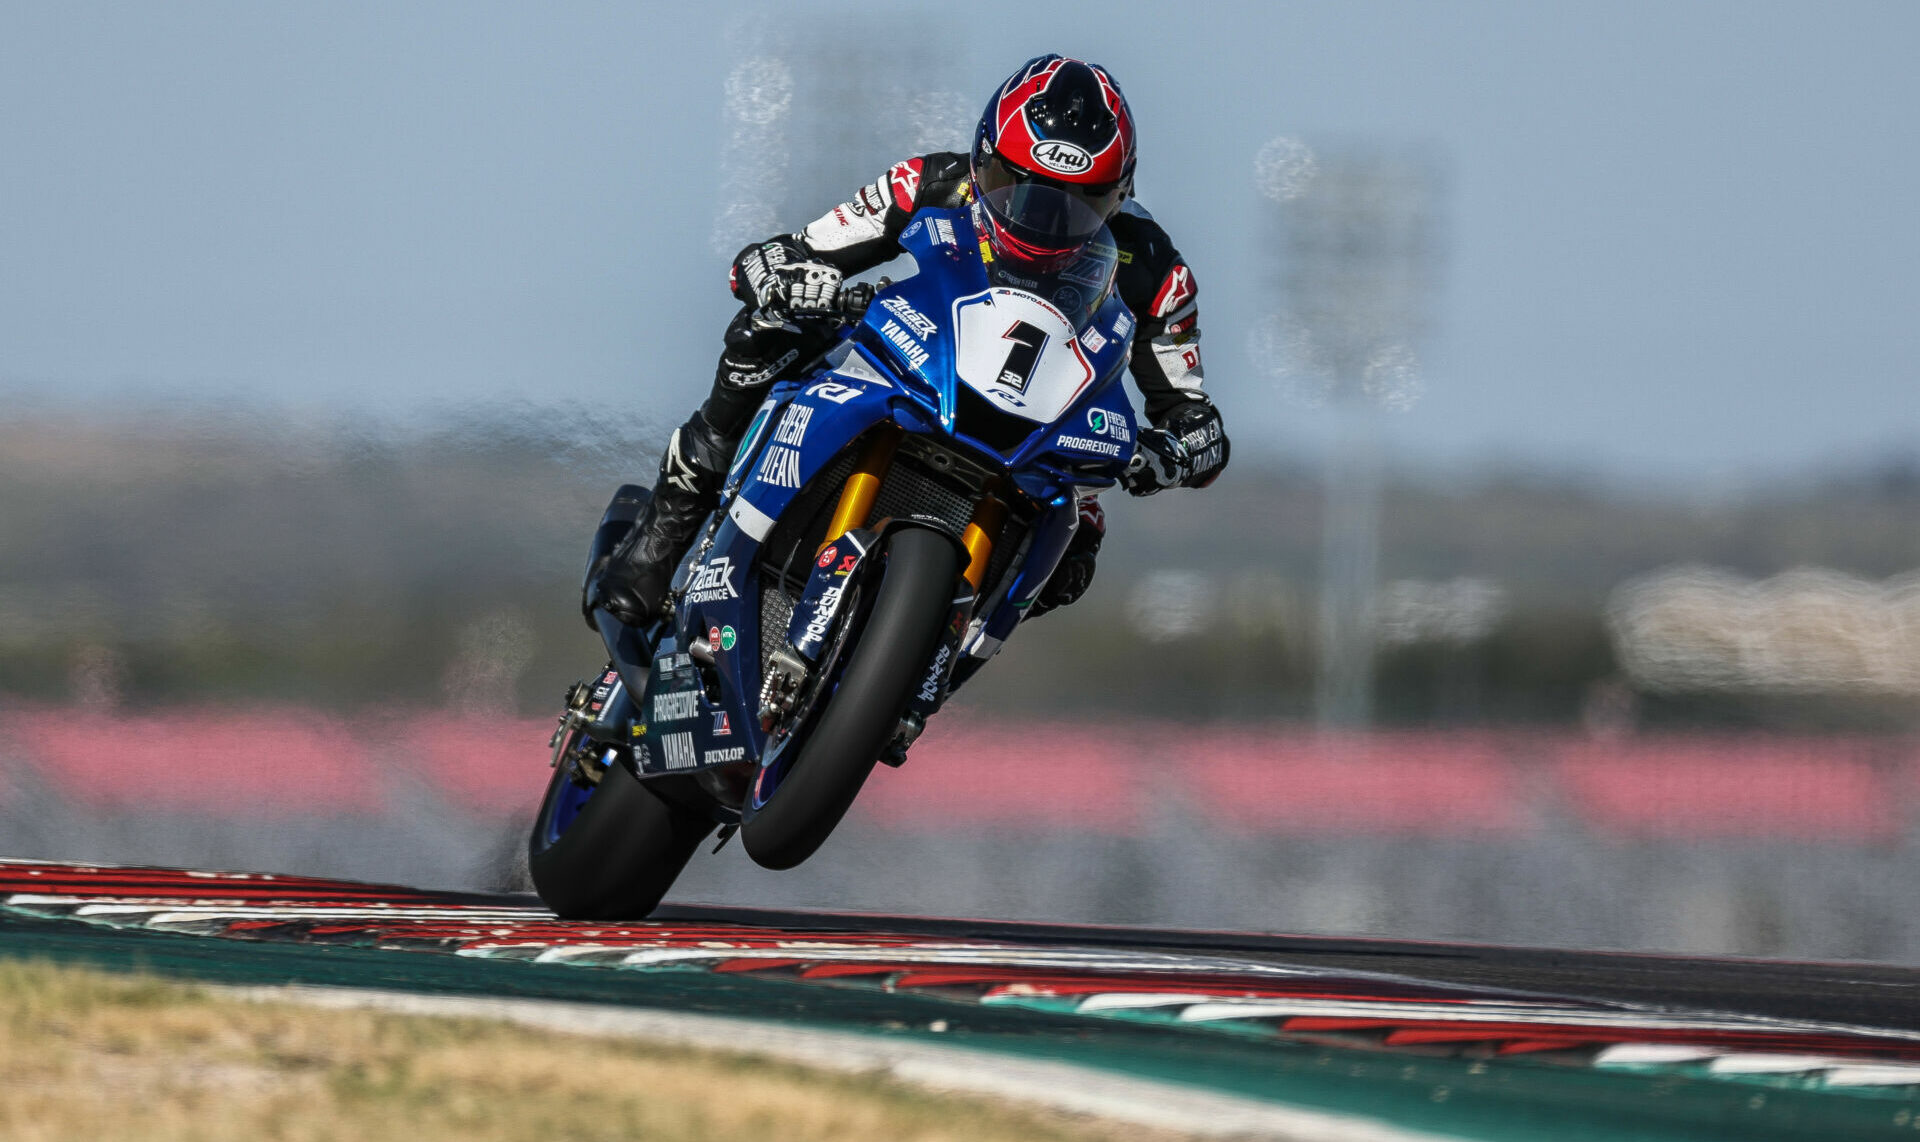 Jake Gagne (1) in action at Circuit of The Americas (COTA). Photo by Brian J. Nelson.